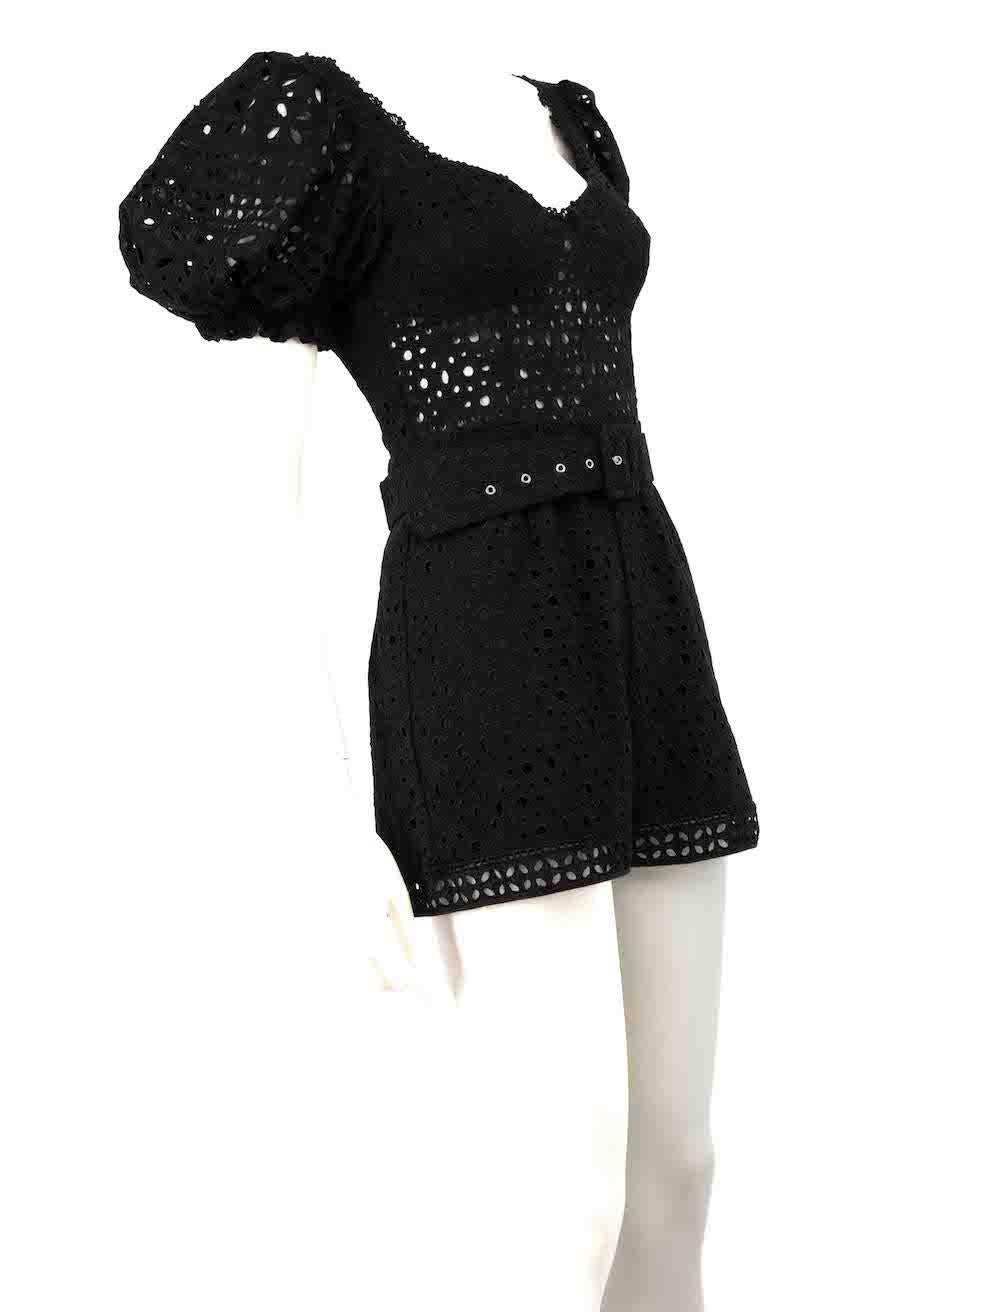 CONDITION is Very good. Minimal wear to playsuit is evident where the buckle finishing on belt is slightly frayed on this used Charo Ruiz designer resale item.
 
 
 
 Details
 
 
 Black
 
 Cotton
 
 Playsuit
 
 Broderie anglaise
 
 Short puff